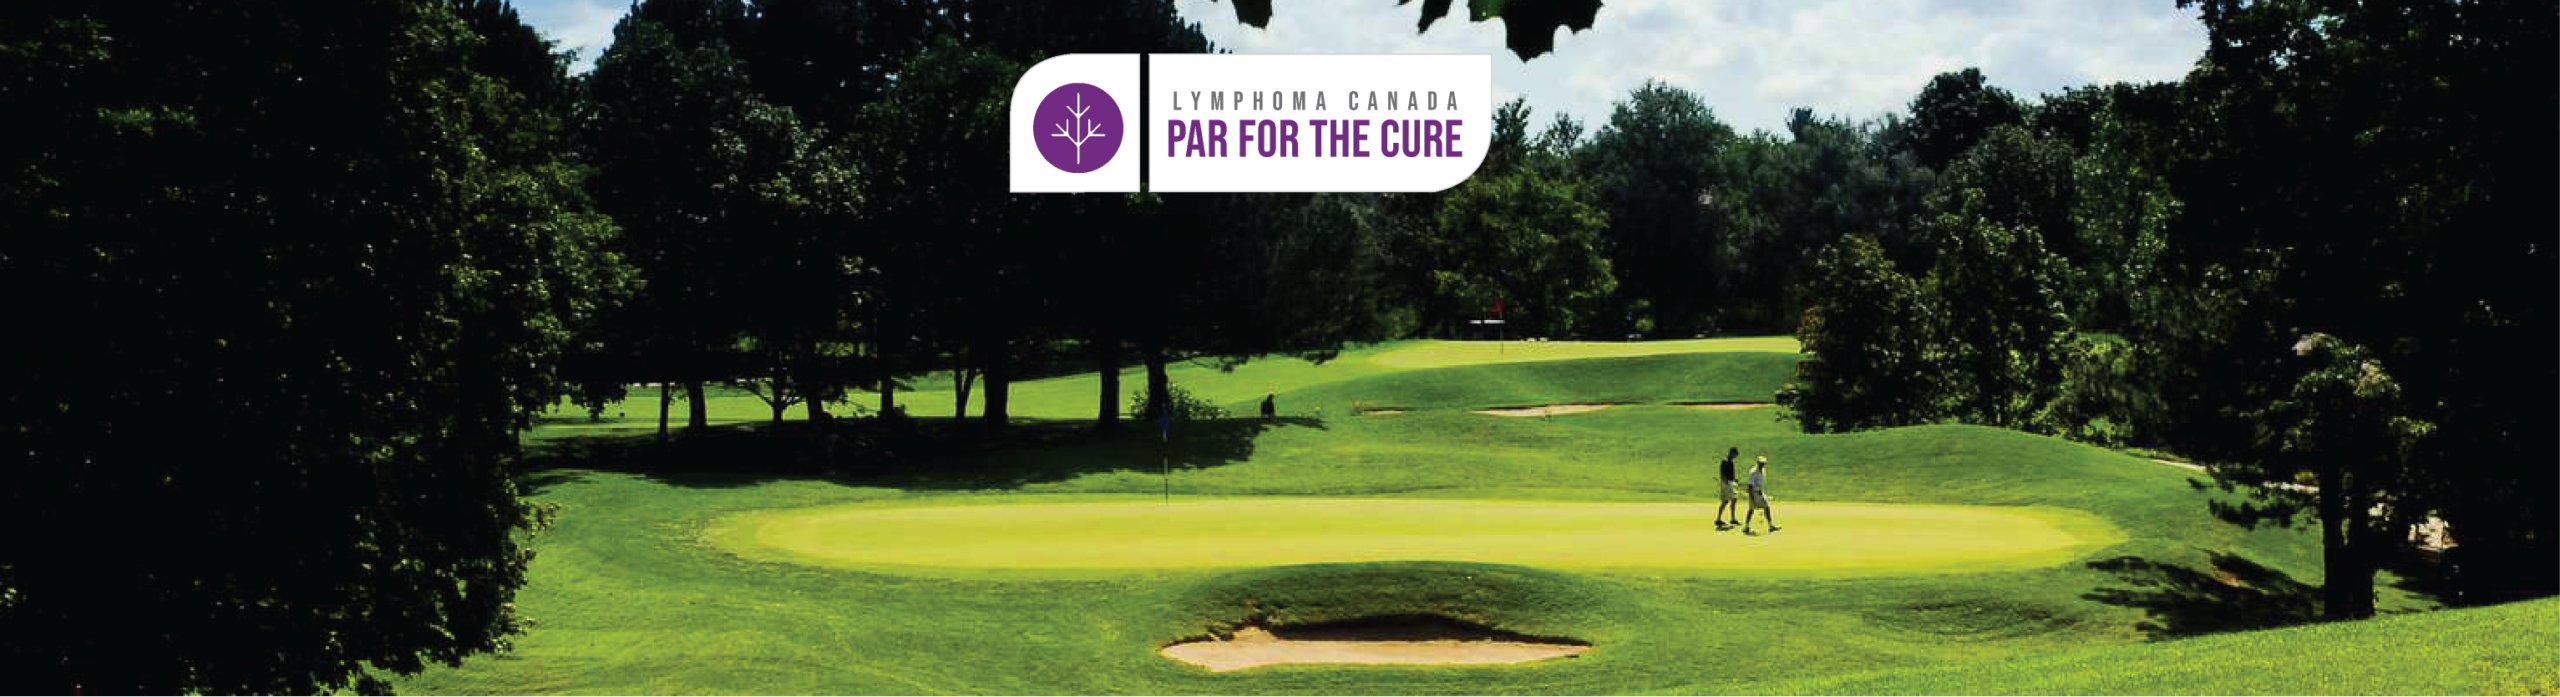 Par for the Cure COVID-19 Safety Protocols